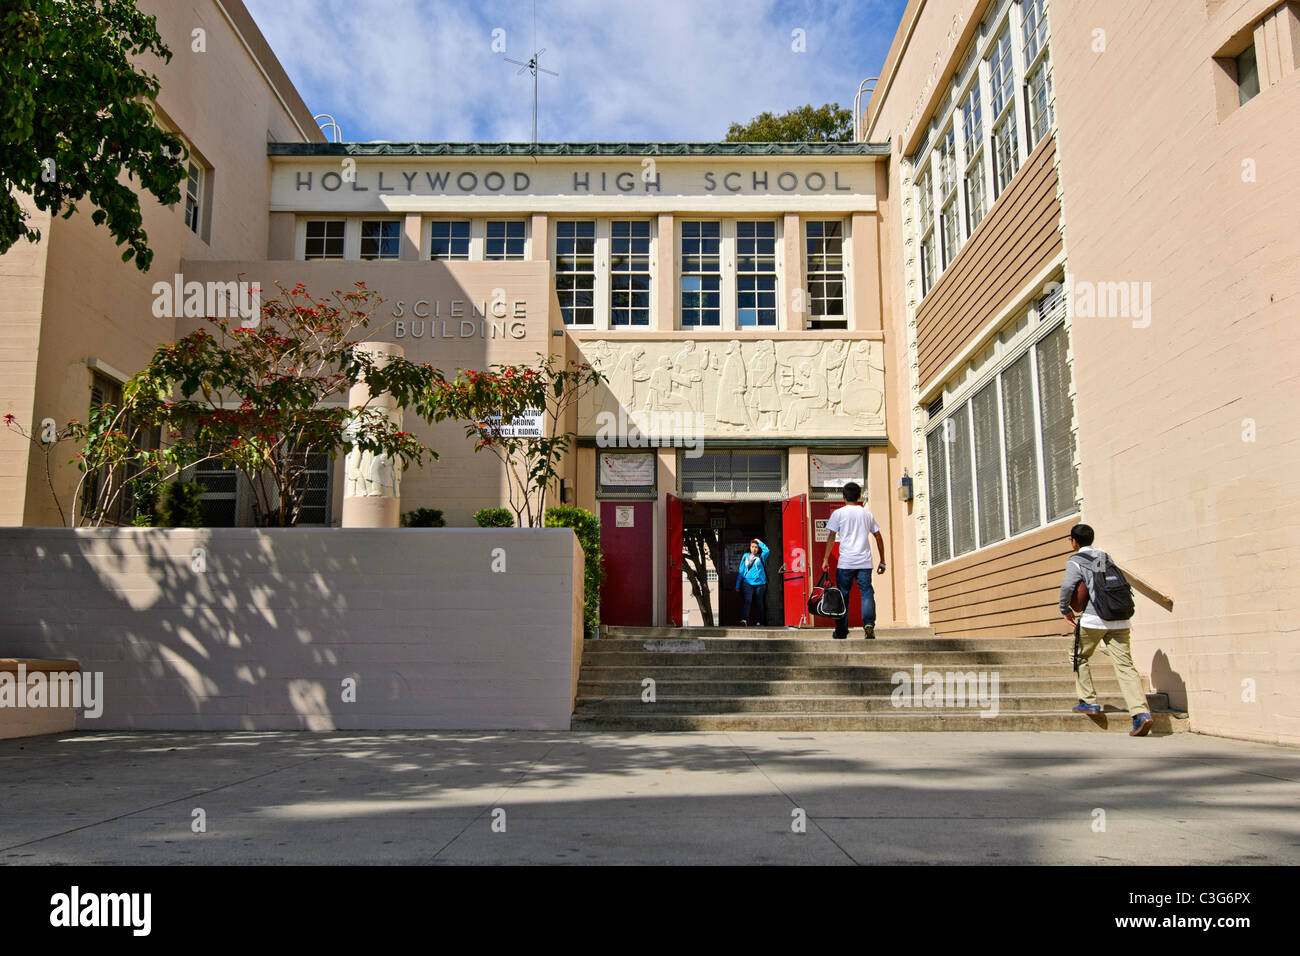 Hollywood High School. Banque D'Images